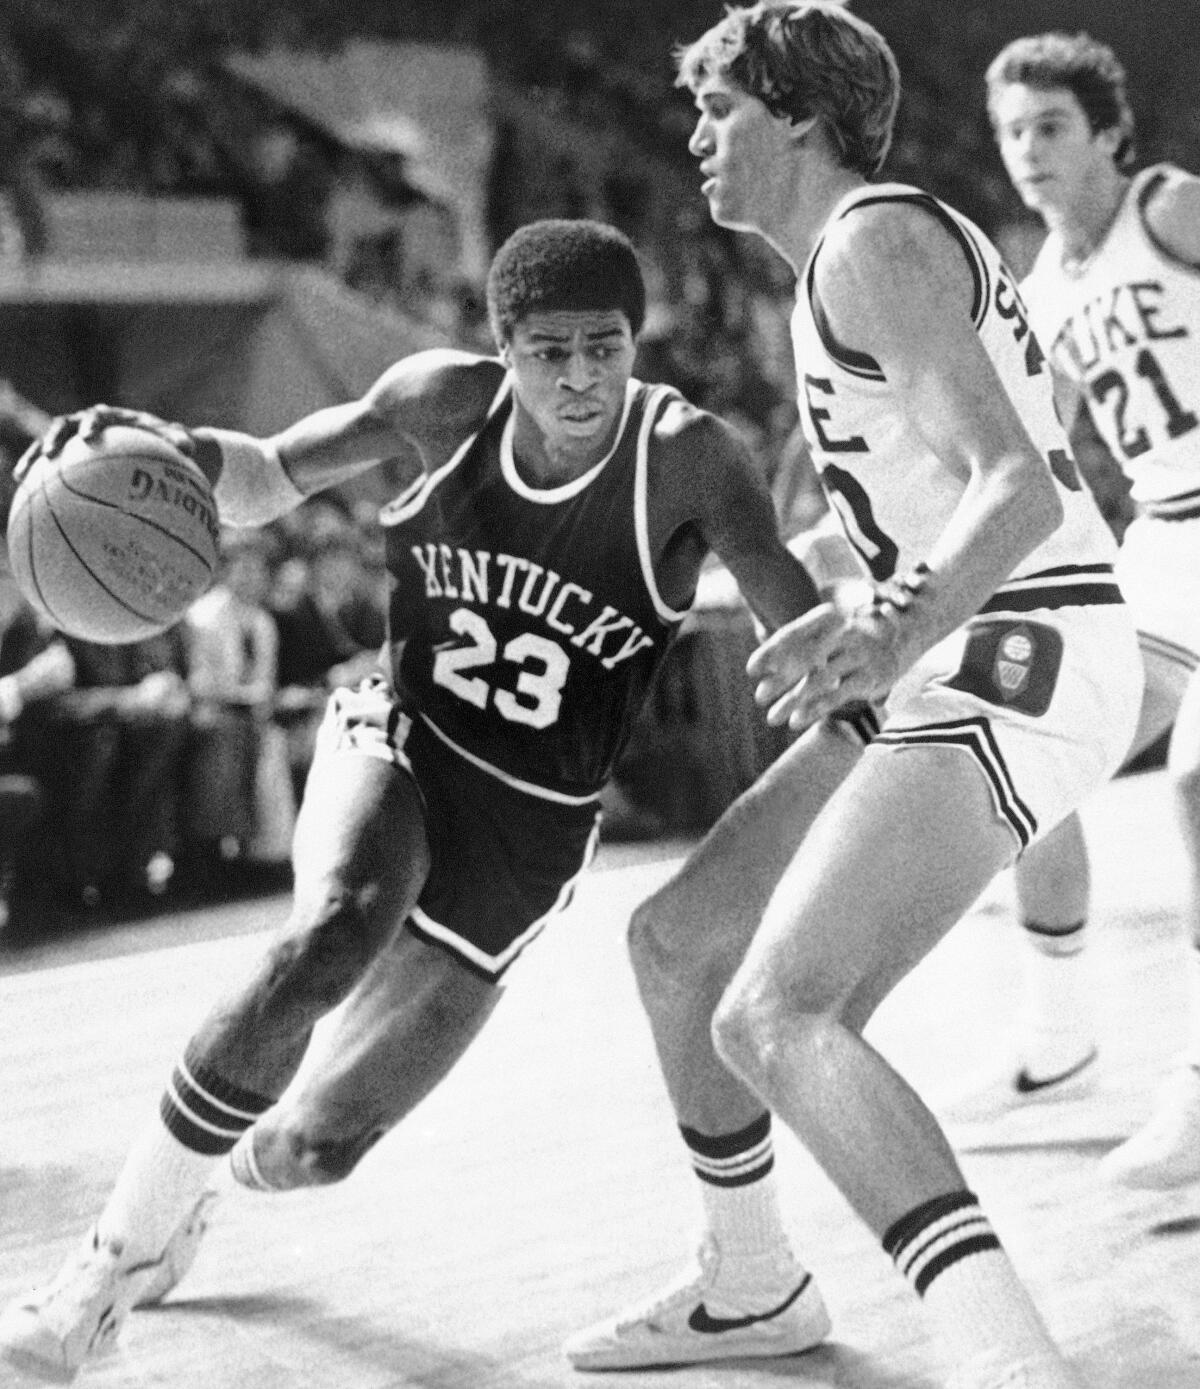 Kentucky star Dwight Anderson drives past Duke University's Jim Suddath during a game on Nov. 19, 1979.